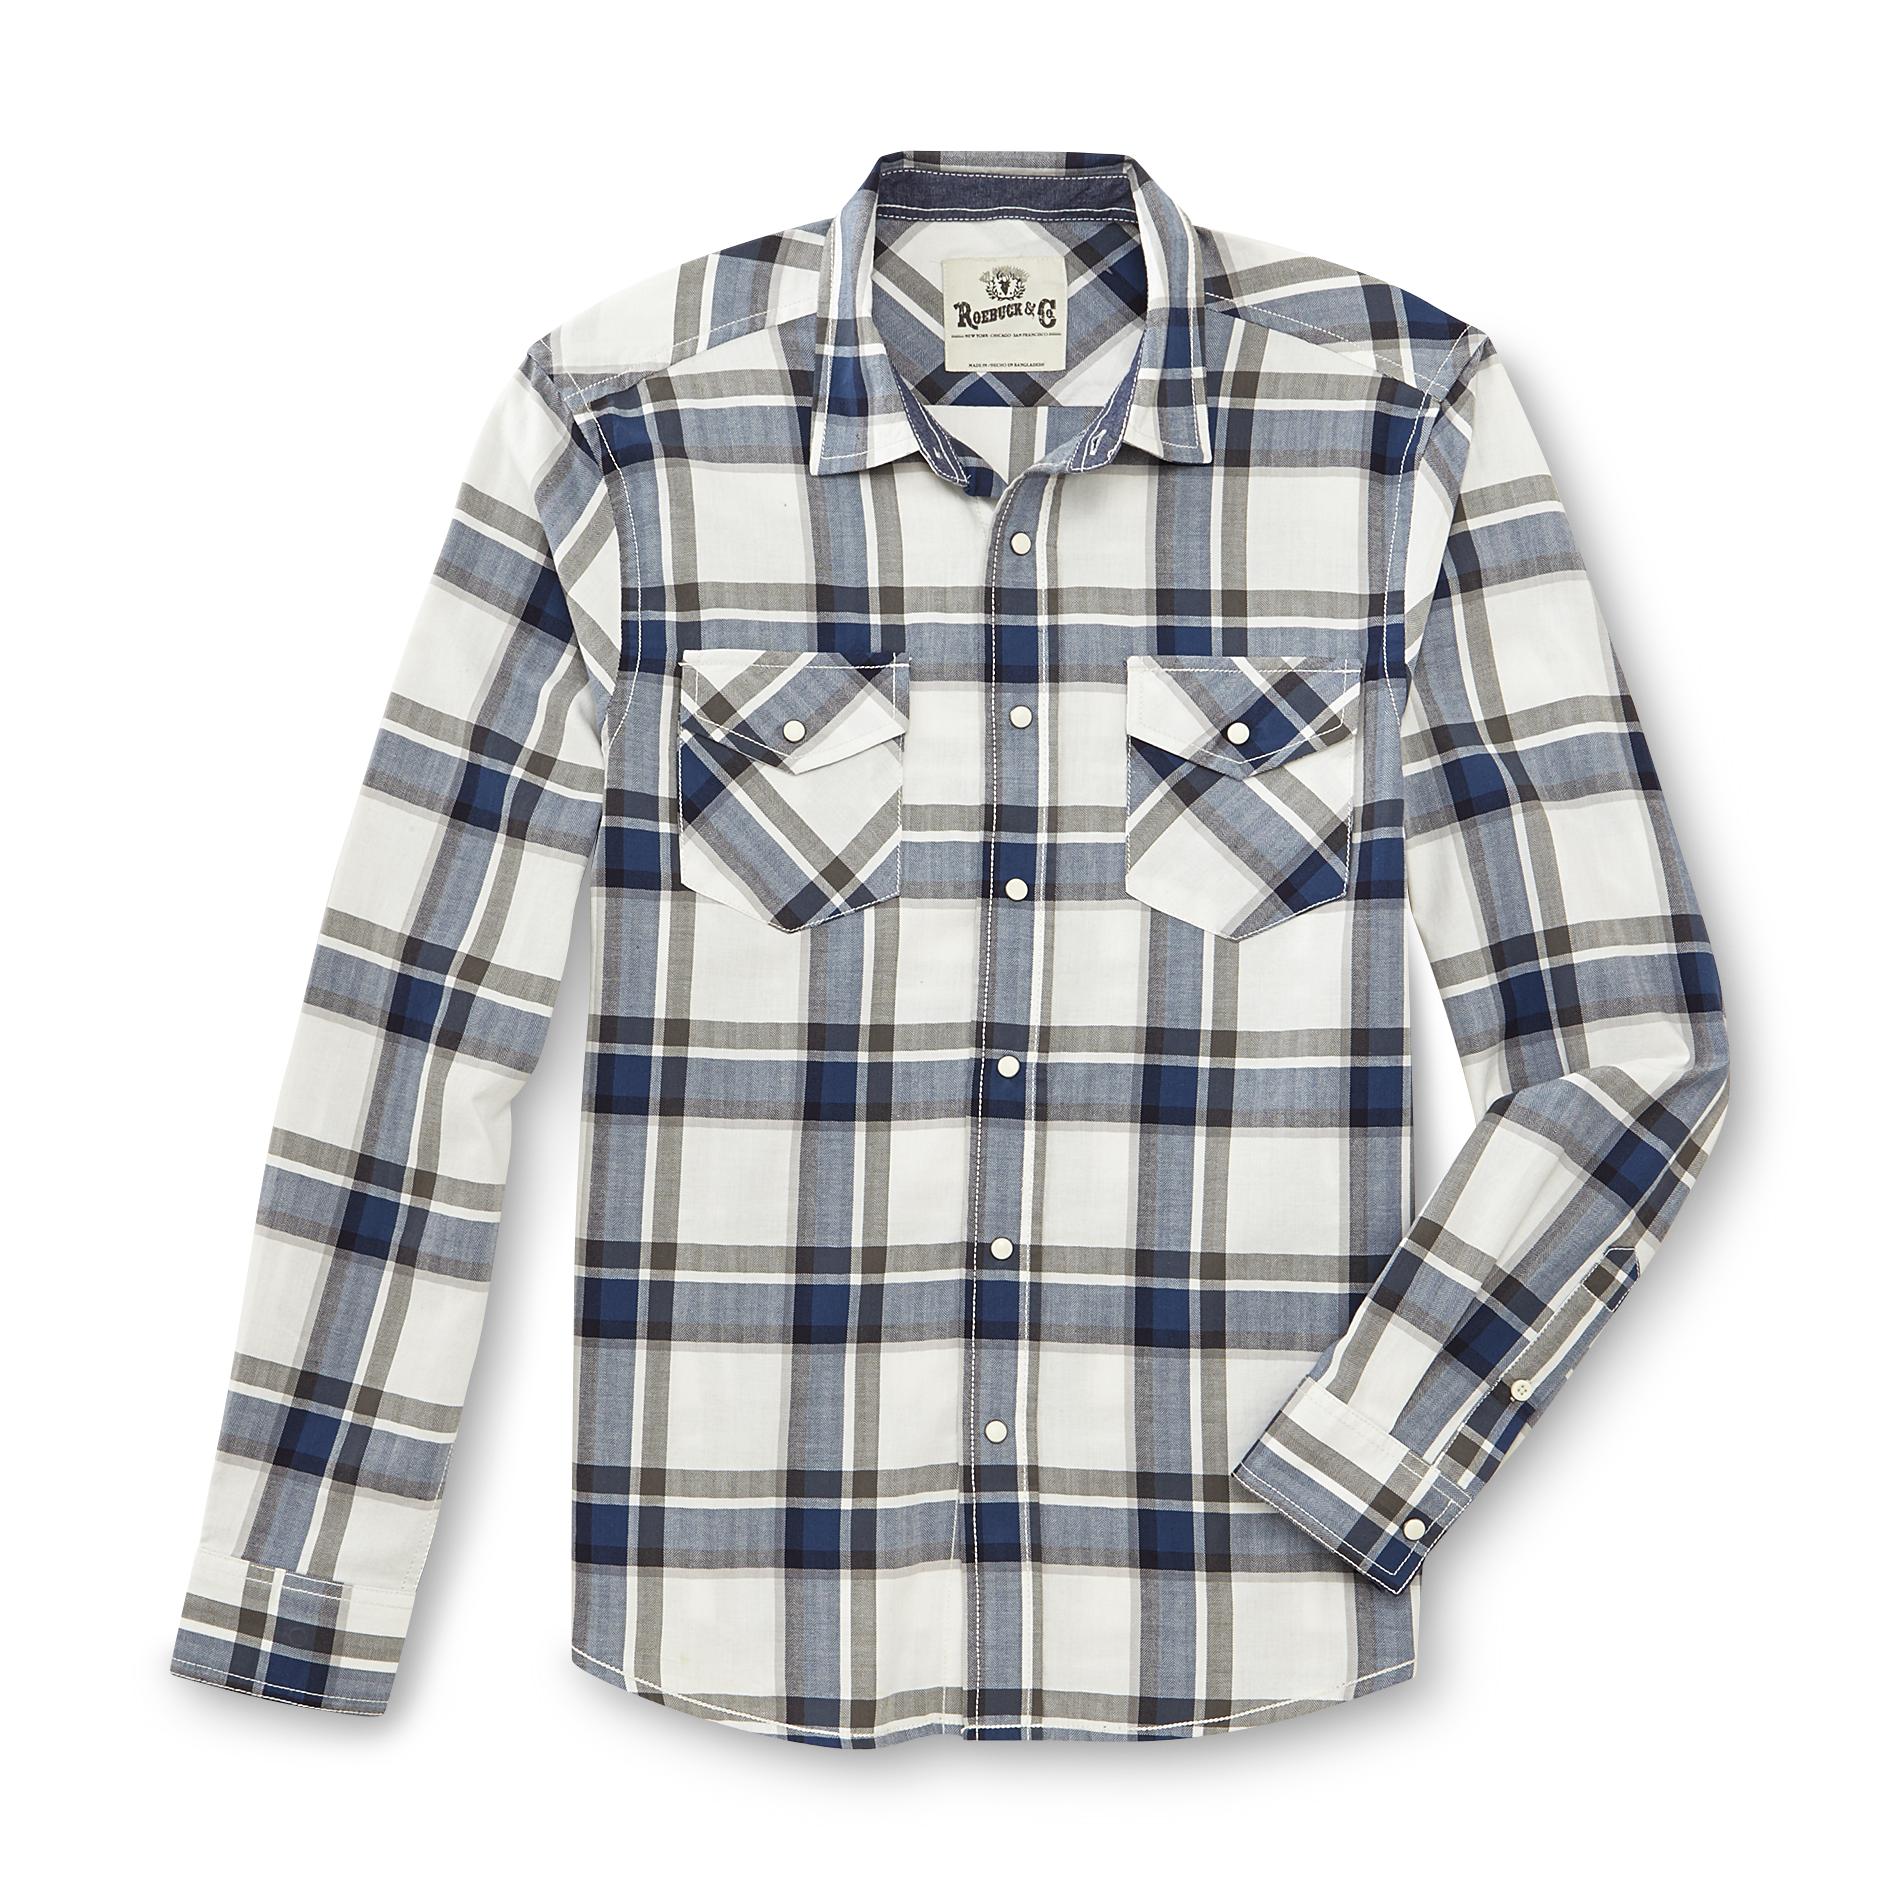 Roebuck & Co. Young Men's Snap-Front Casual Shirt - Plaid